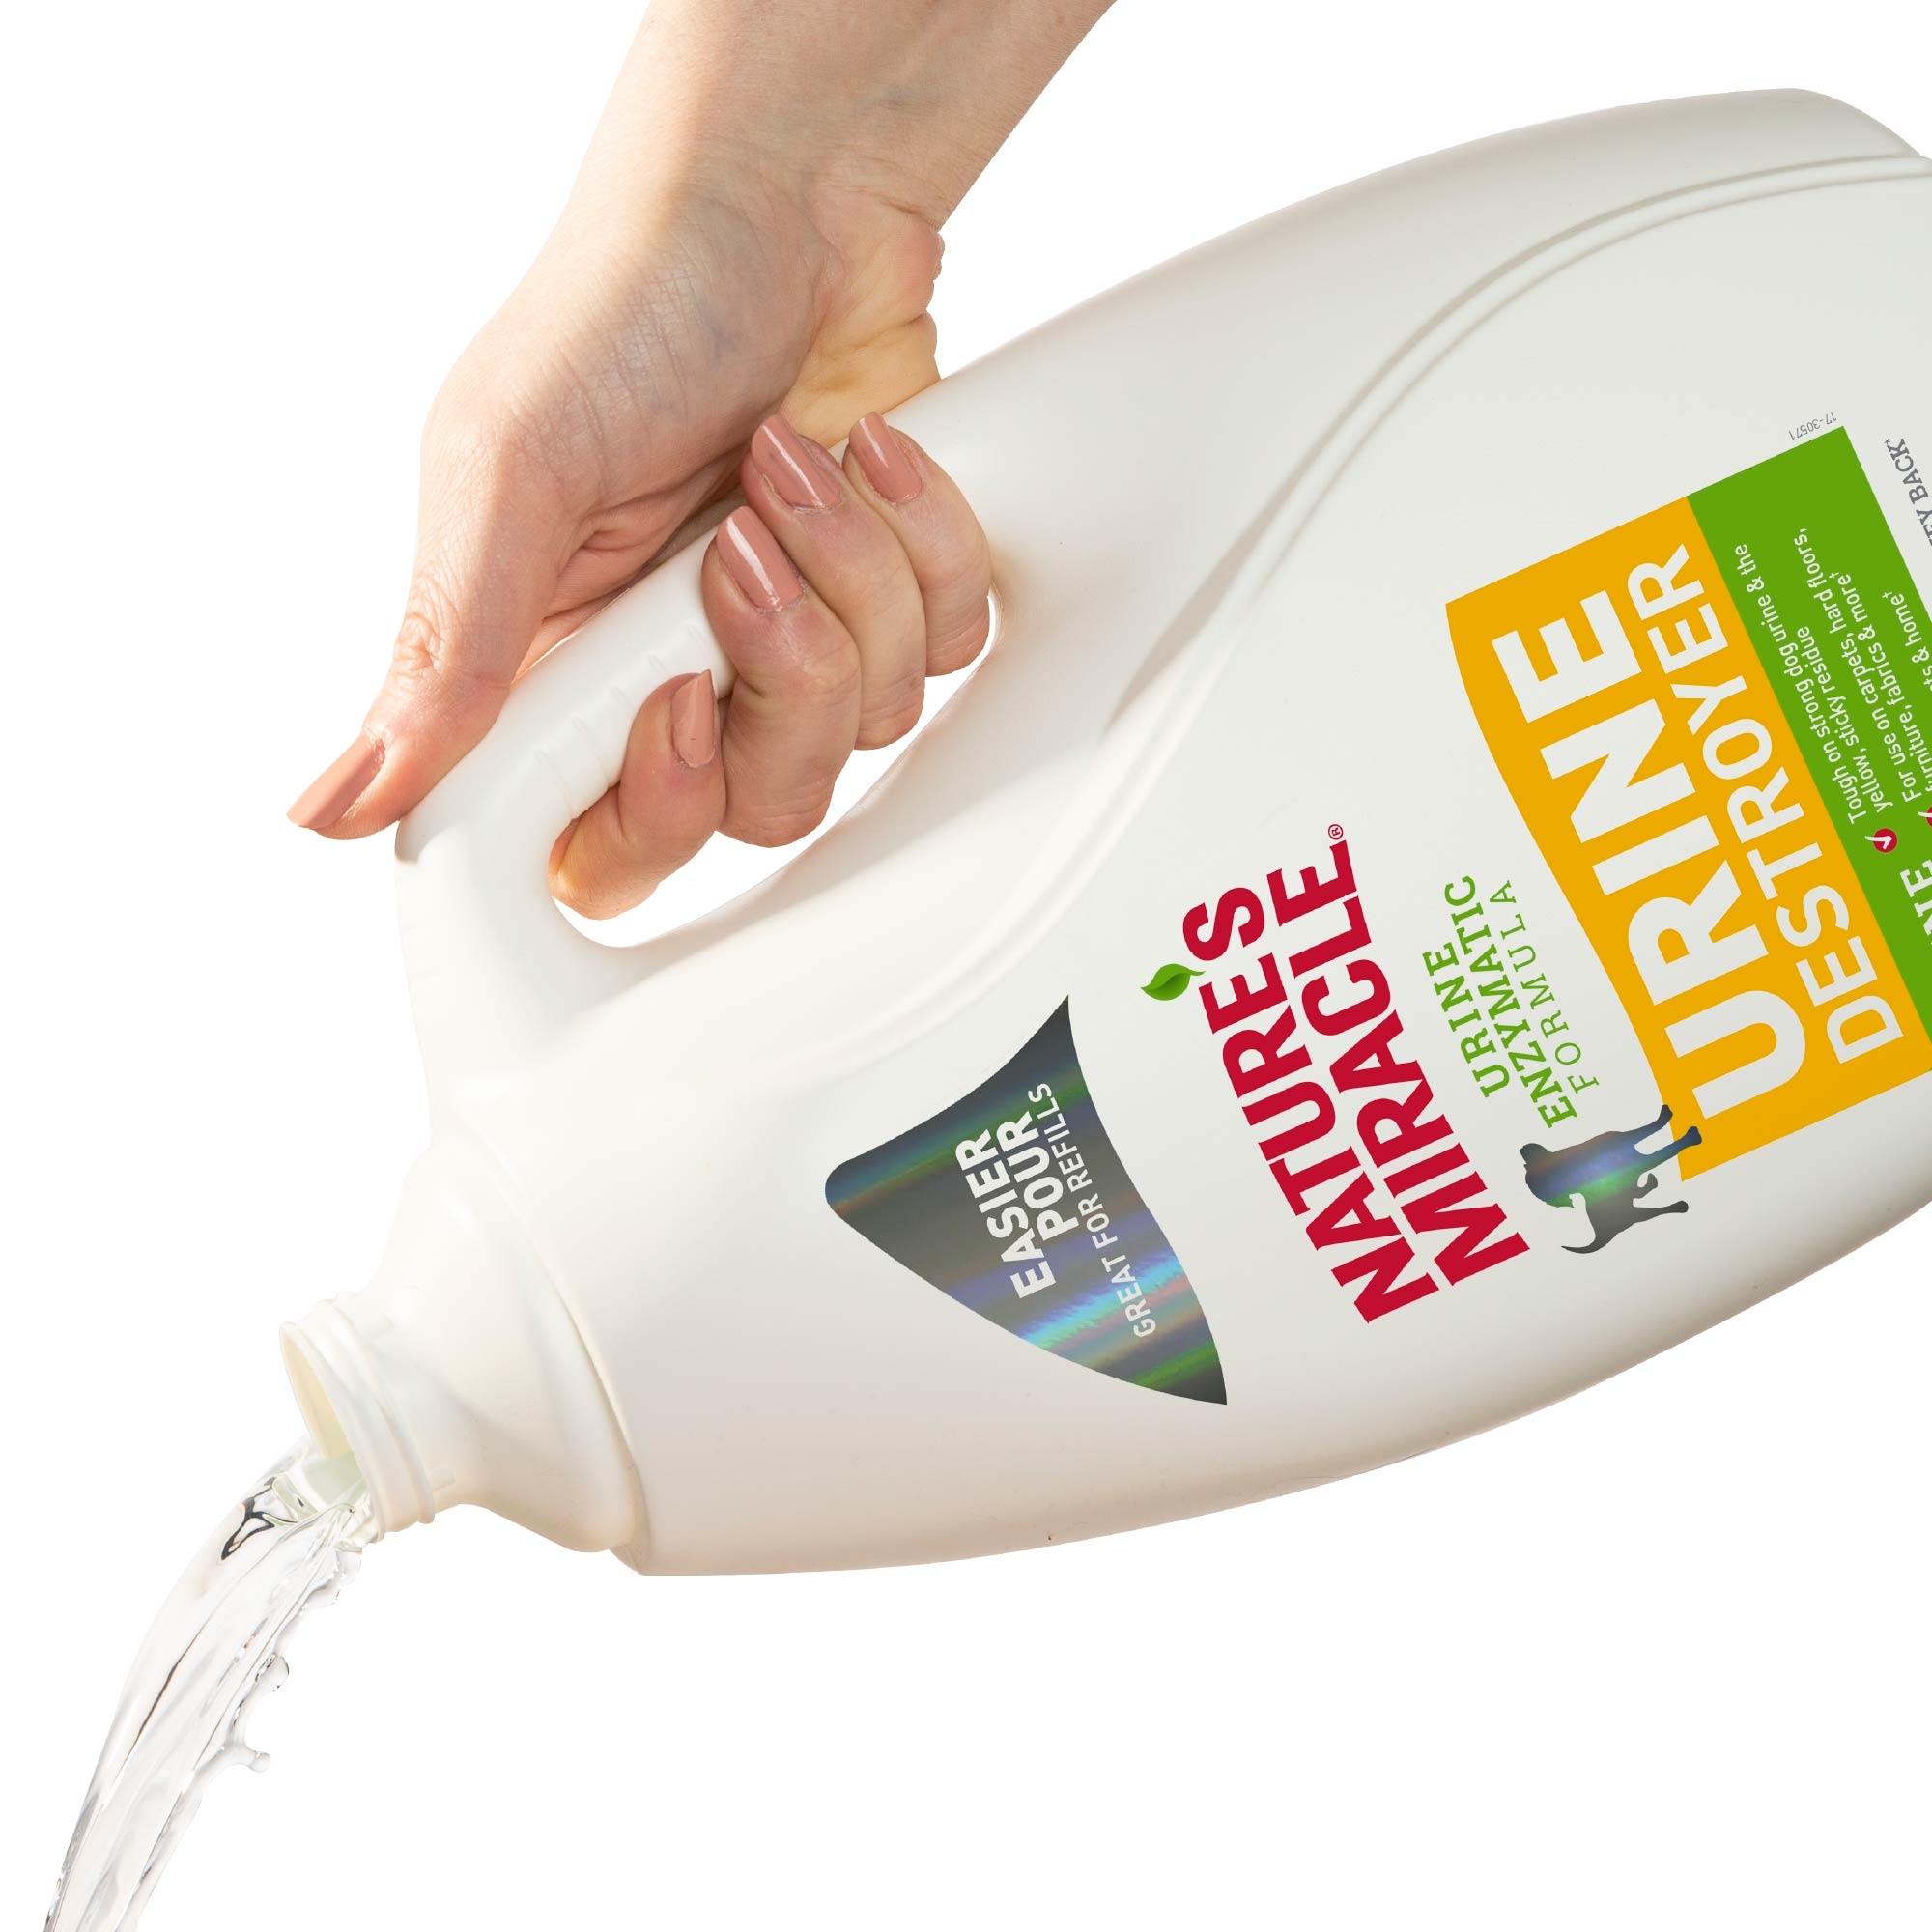 Nature's Miracle Urine Destroyer, Light Fresh Scent, 1 Gallon